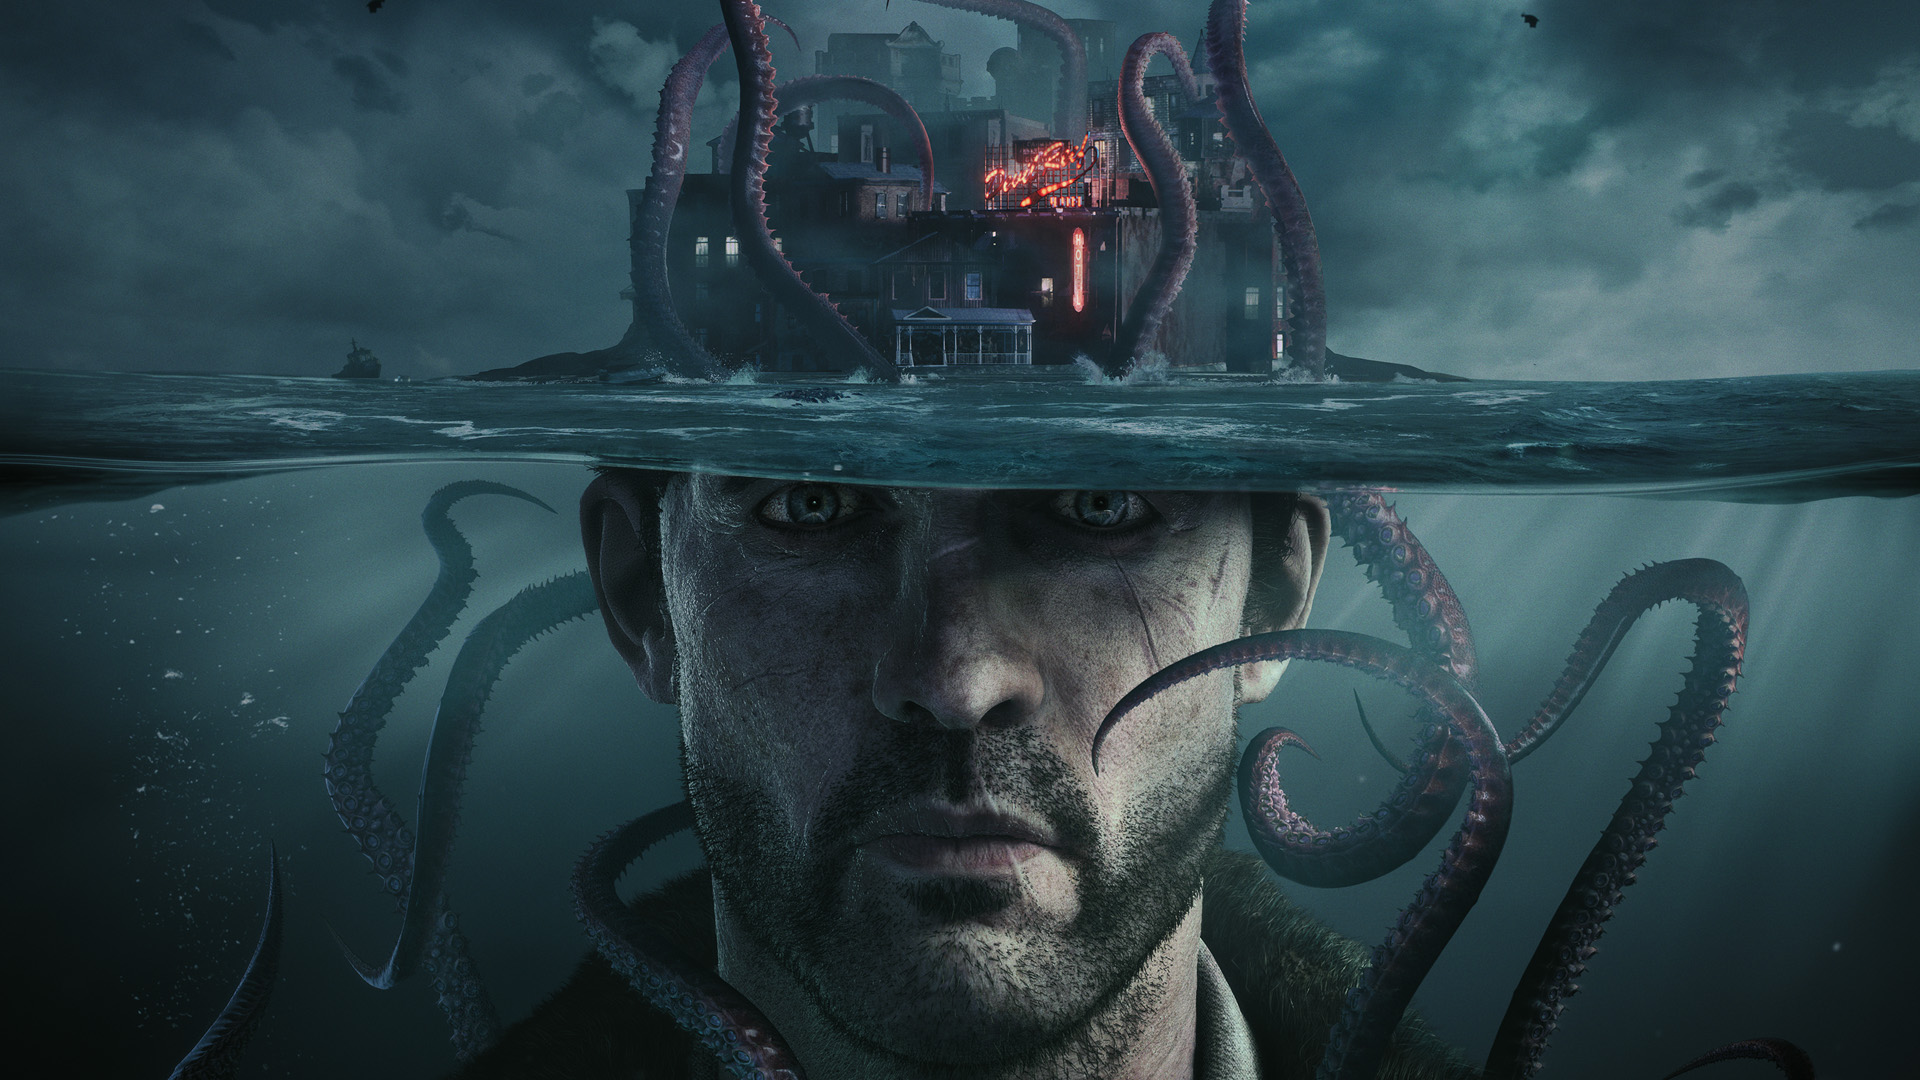 the sinking city reviews